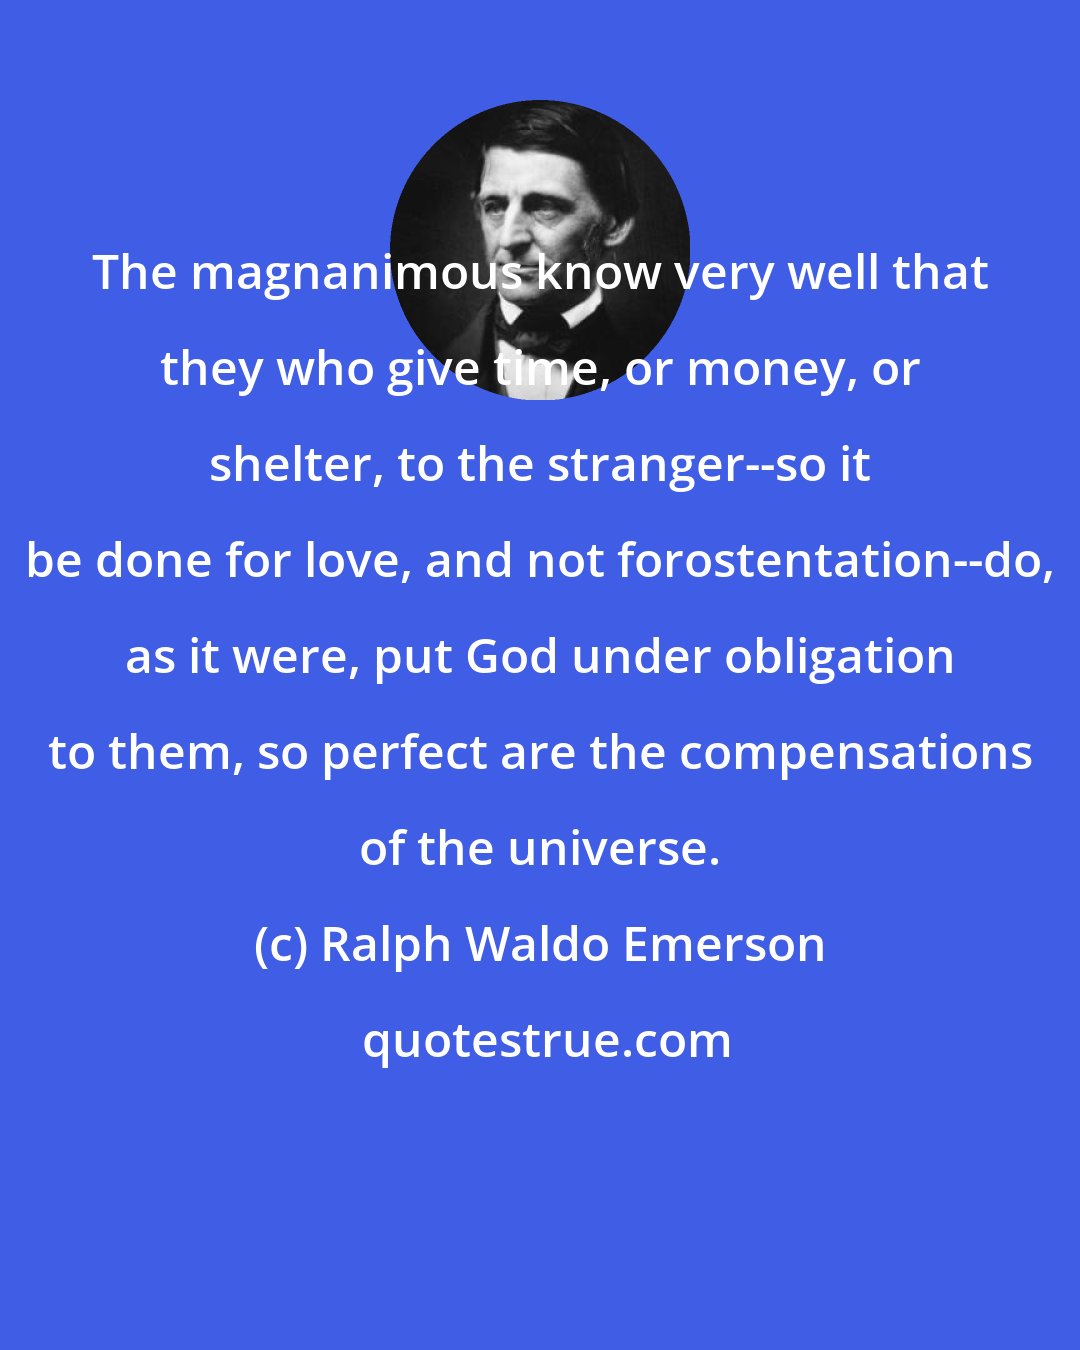 Ralph Waldo Emerson: The magnanimous know very well that they who give time, or money, or shelter, to the stranger--so it be done for love, and not forostentation--do, as it were, put God under obligation to them, so perfect are the compensations of the universe.